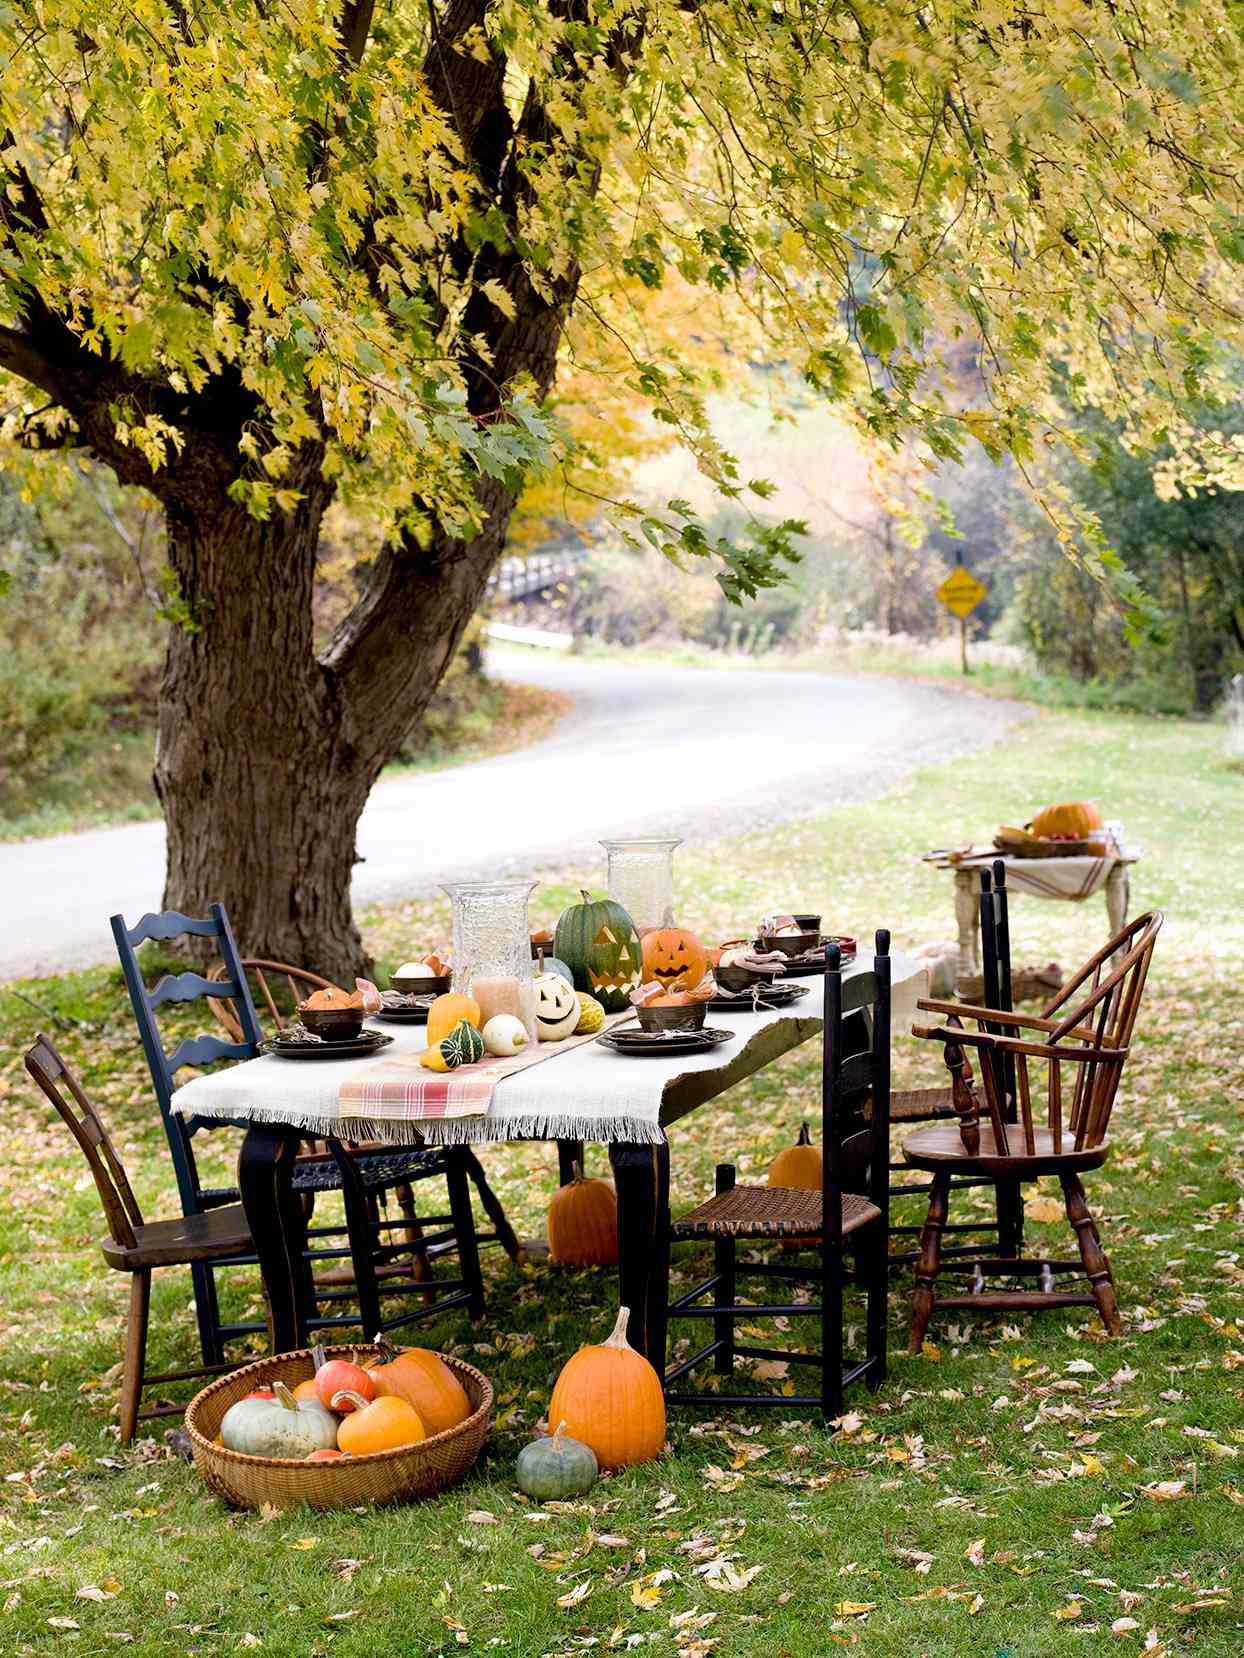 pumpkin party table set outside under a tree